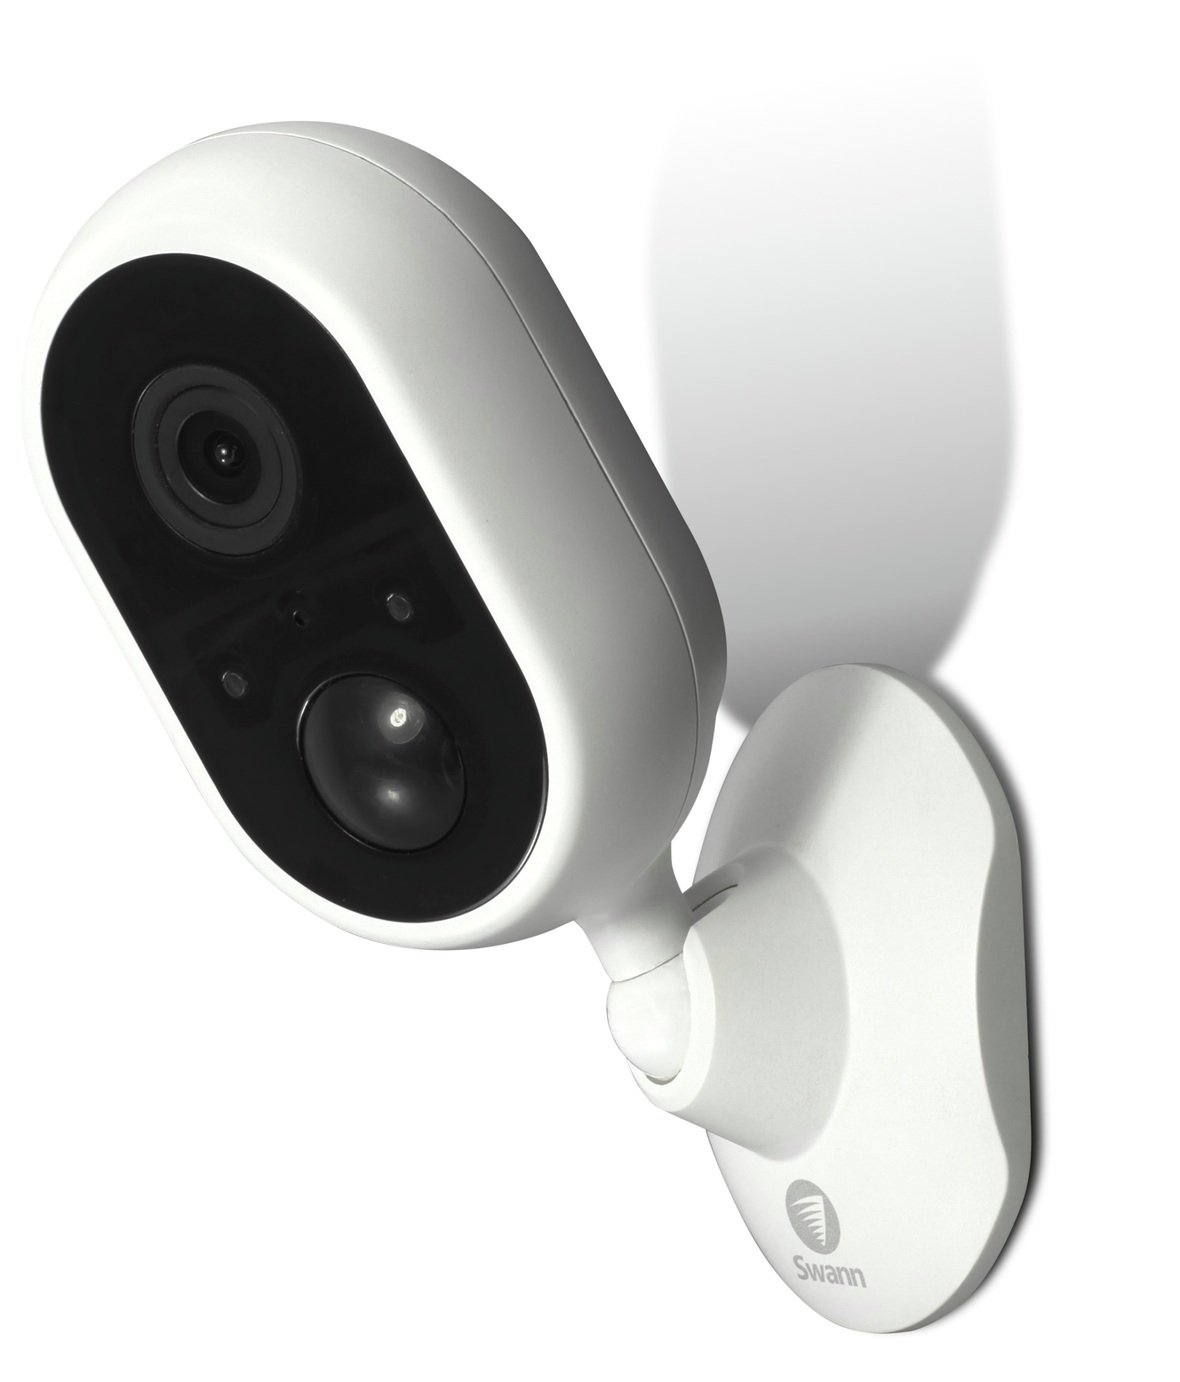 Swann 1080P Wi-Fi Indoor Security Camera Review